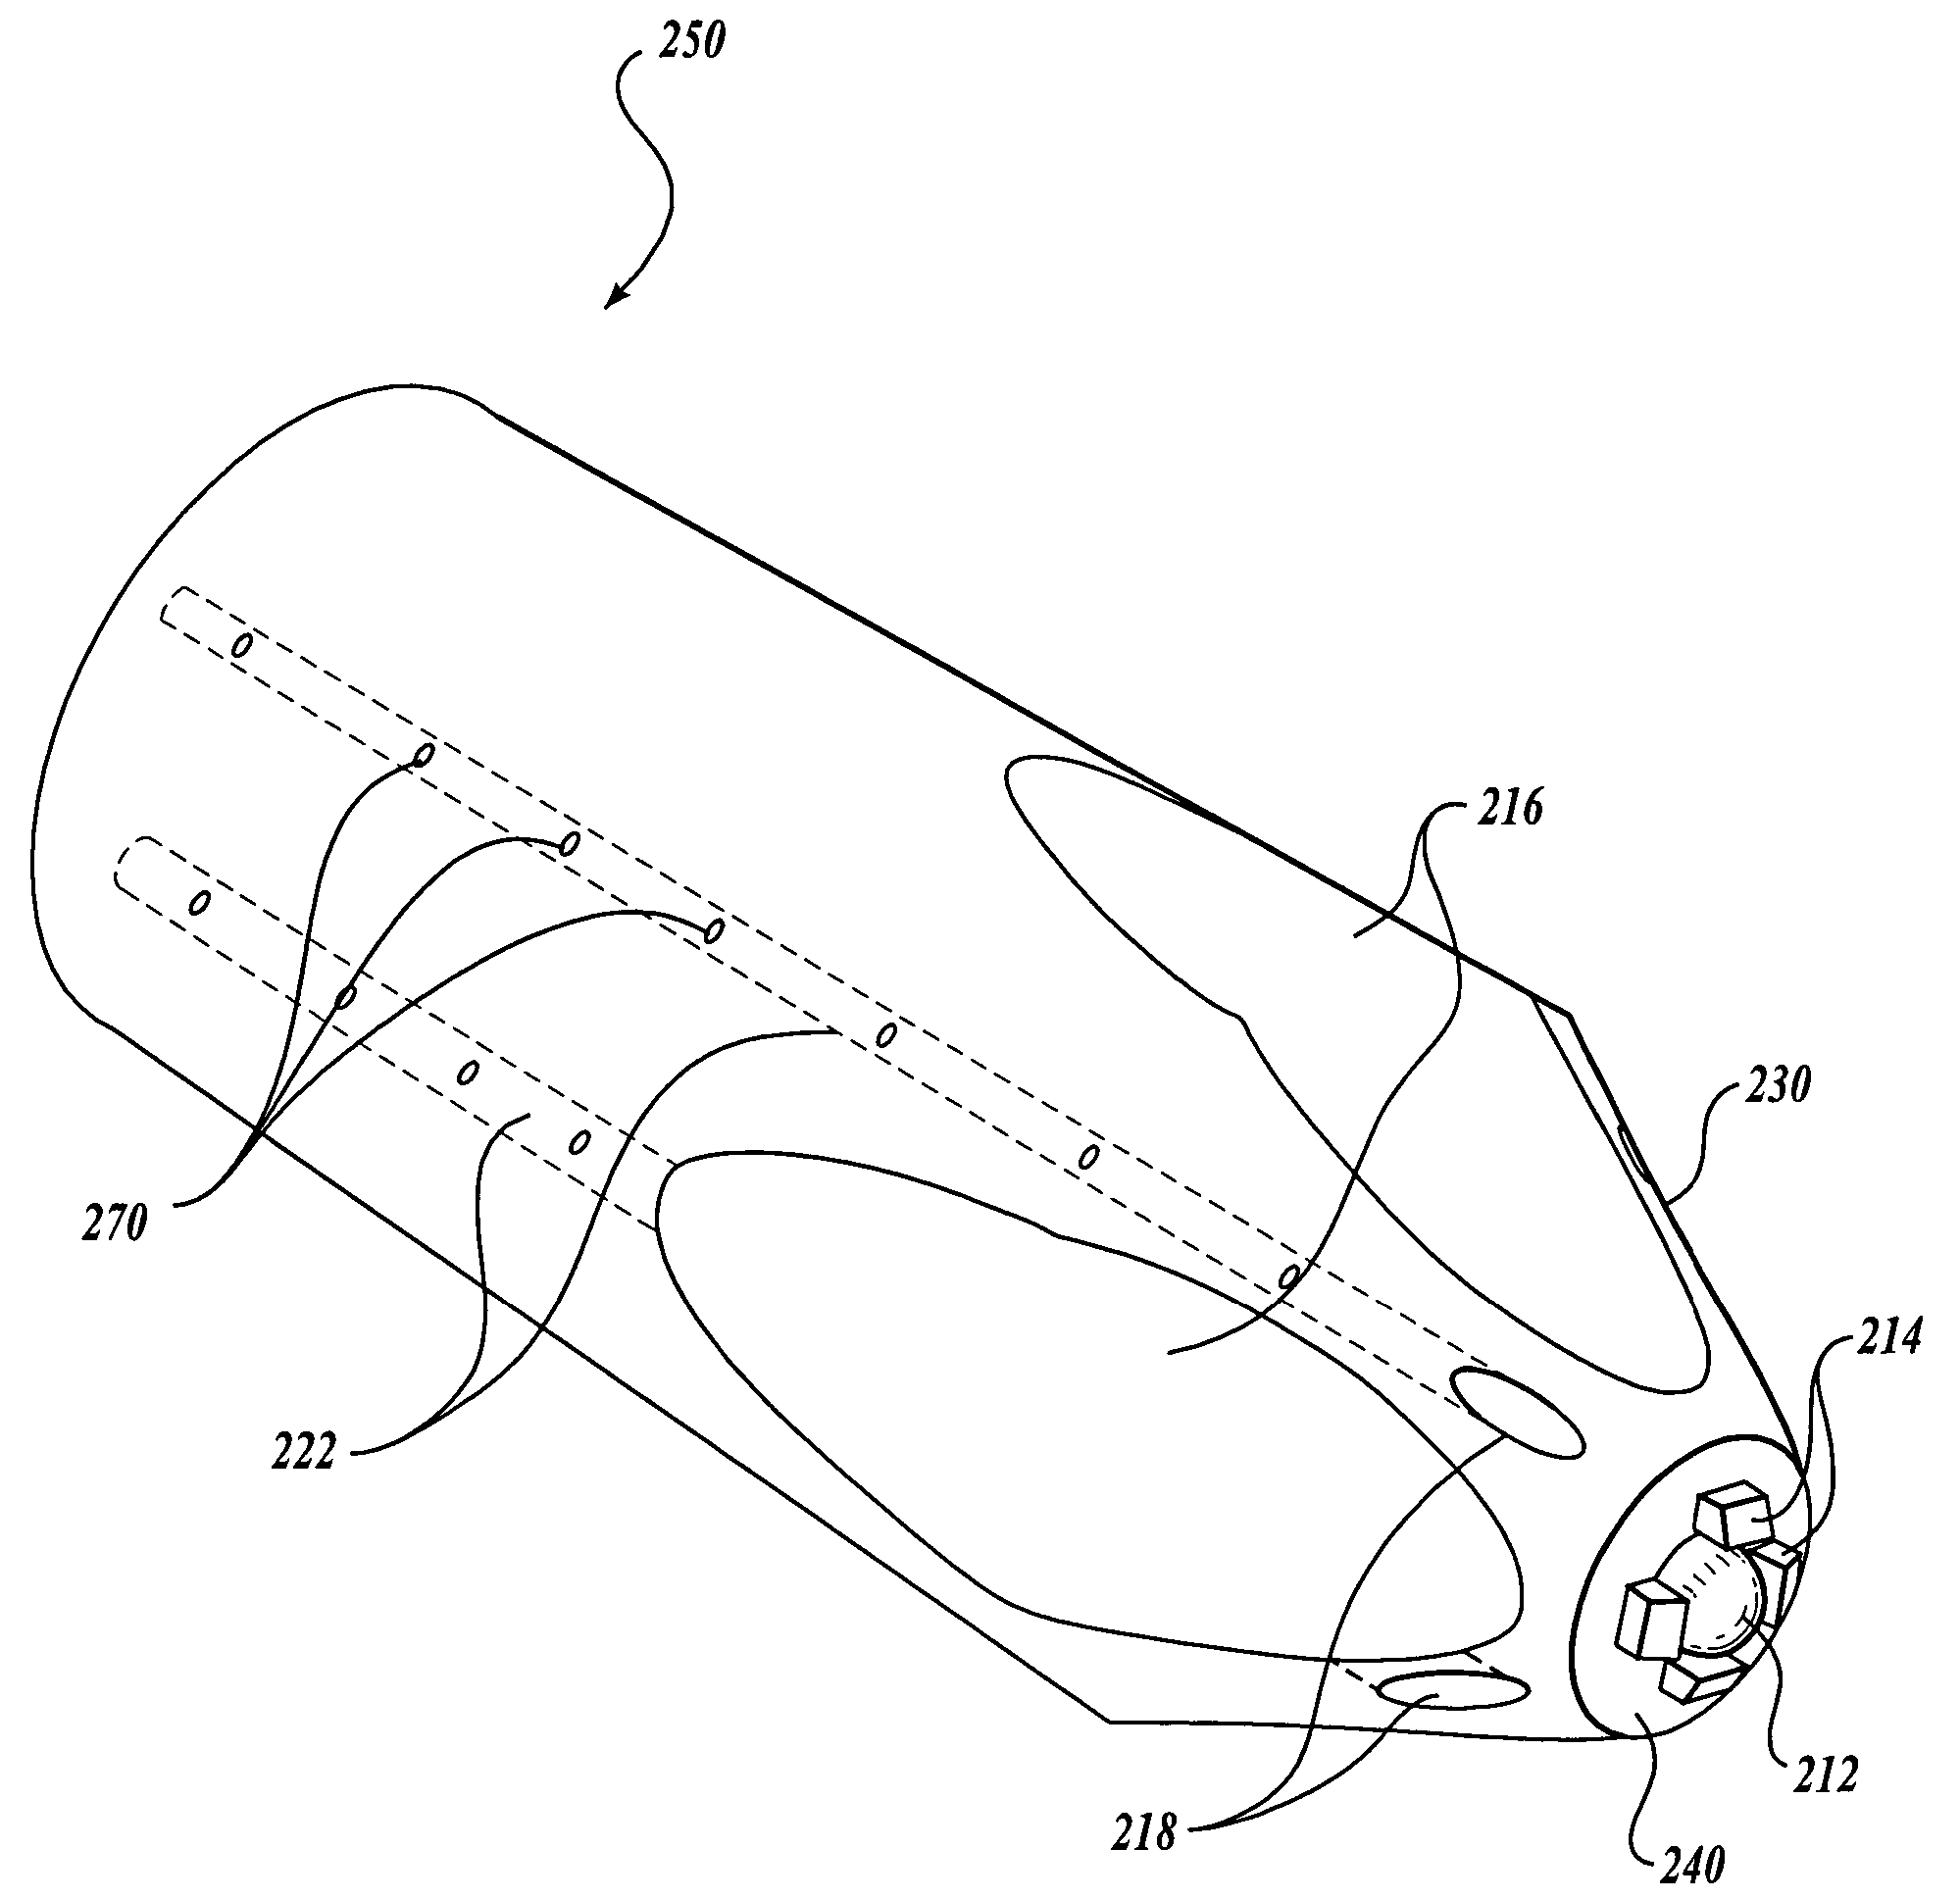 Device for obstruction removal with specific tip structure